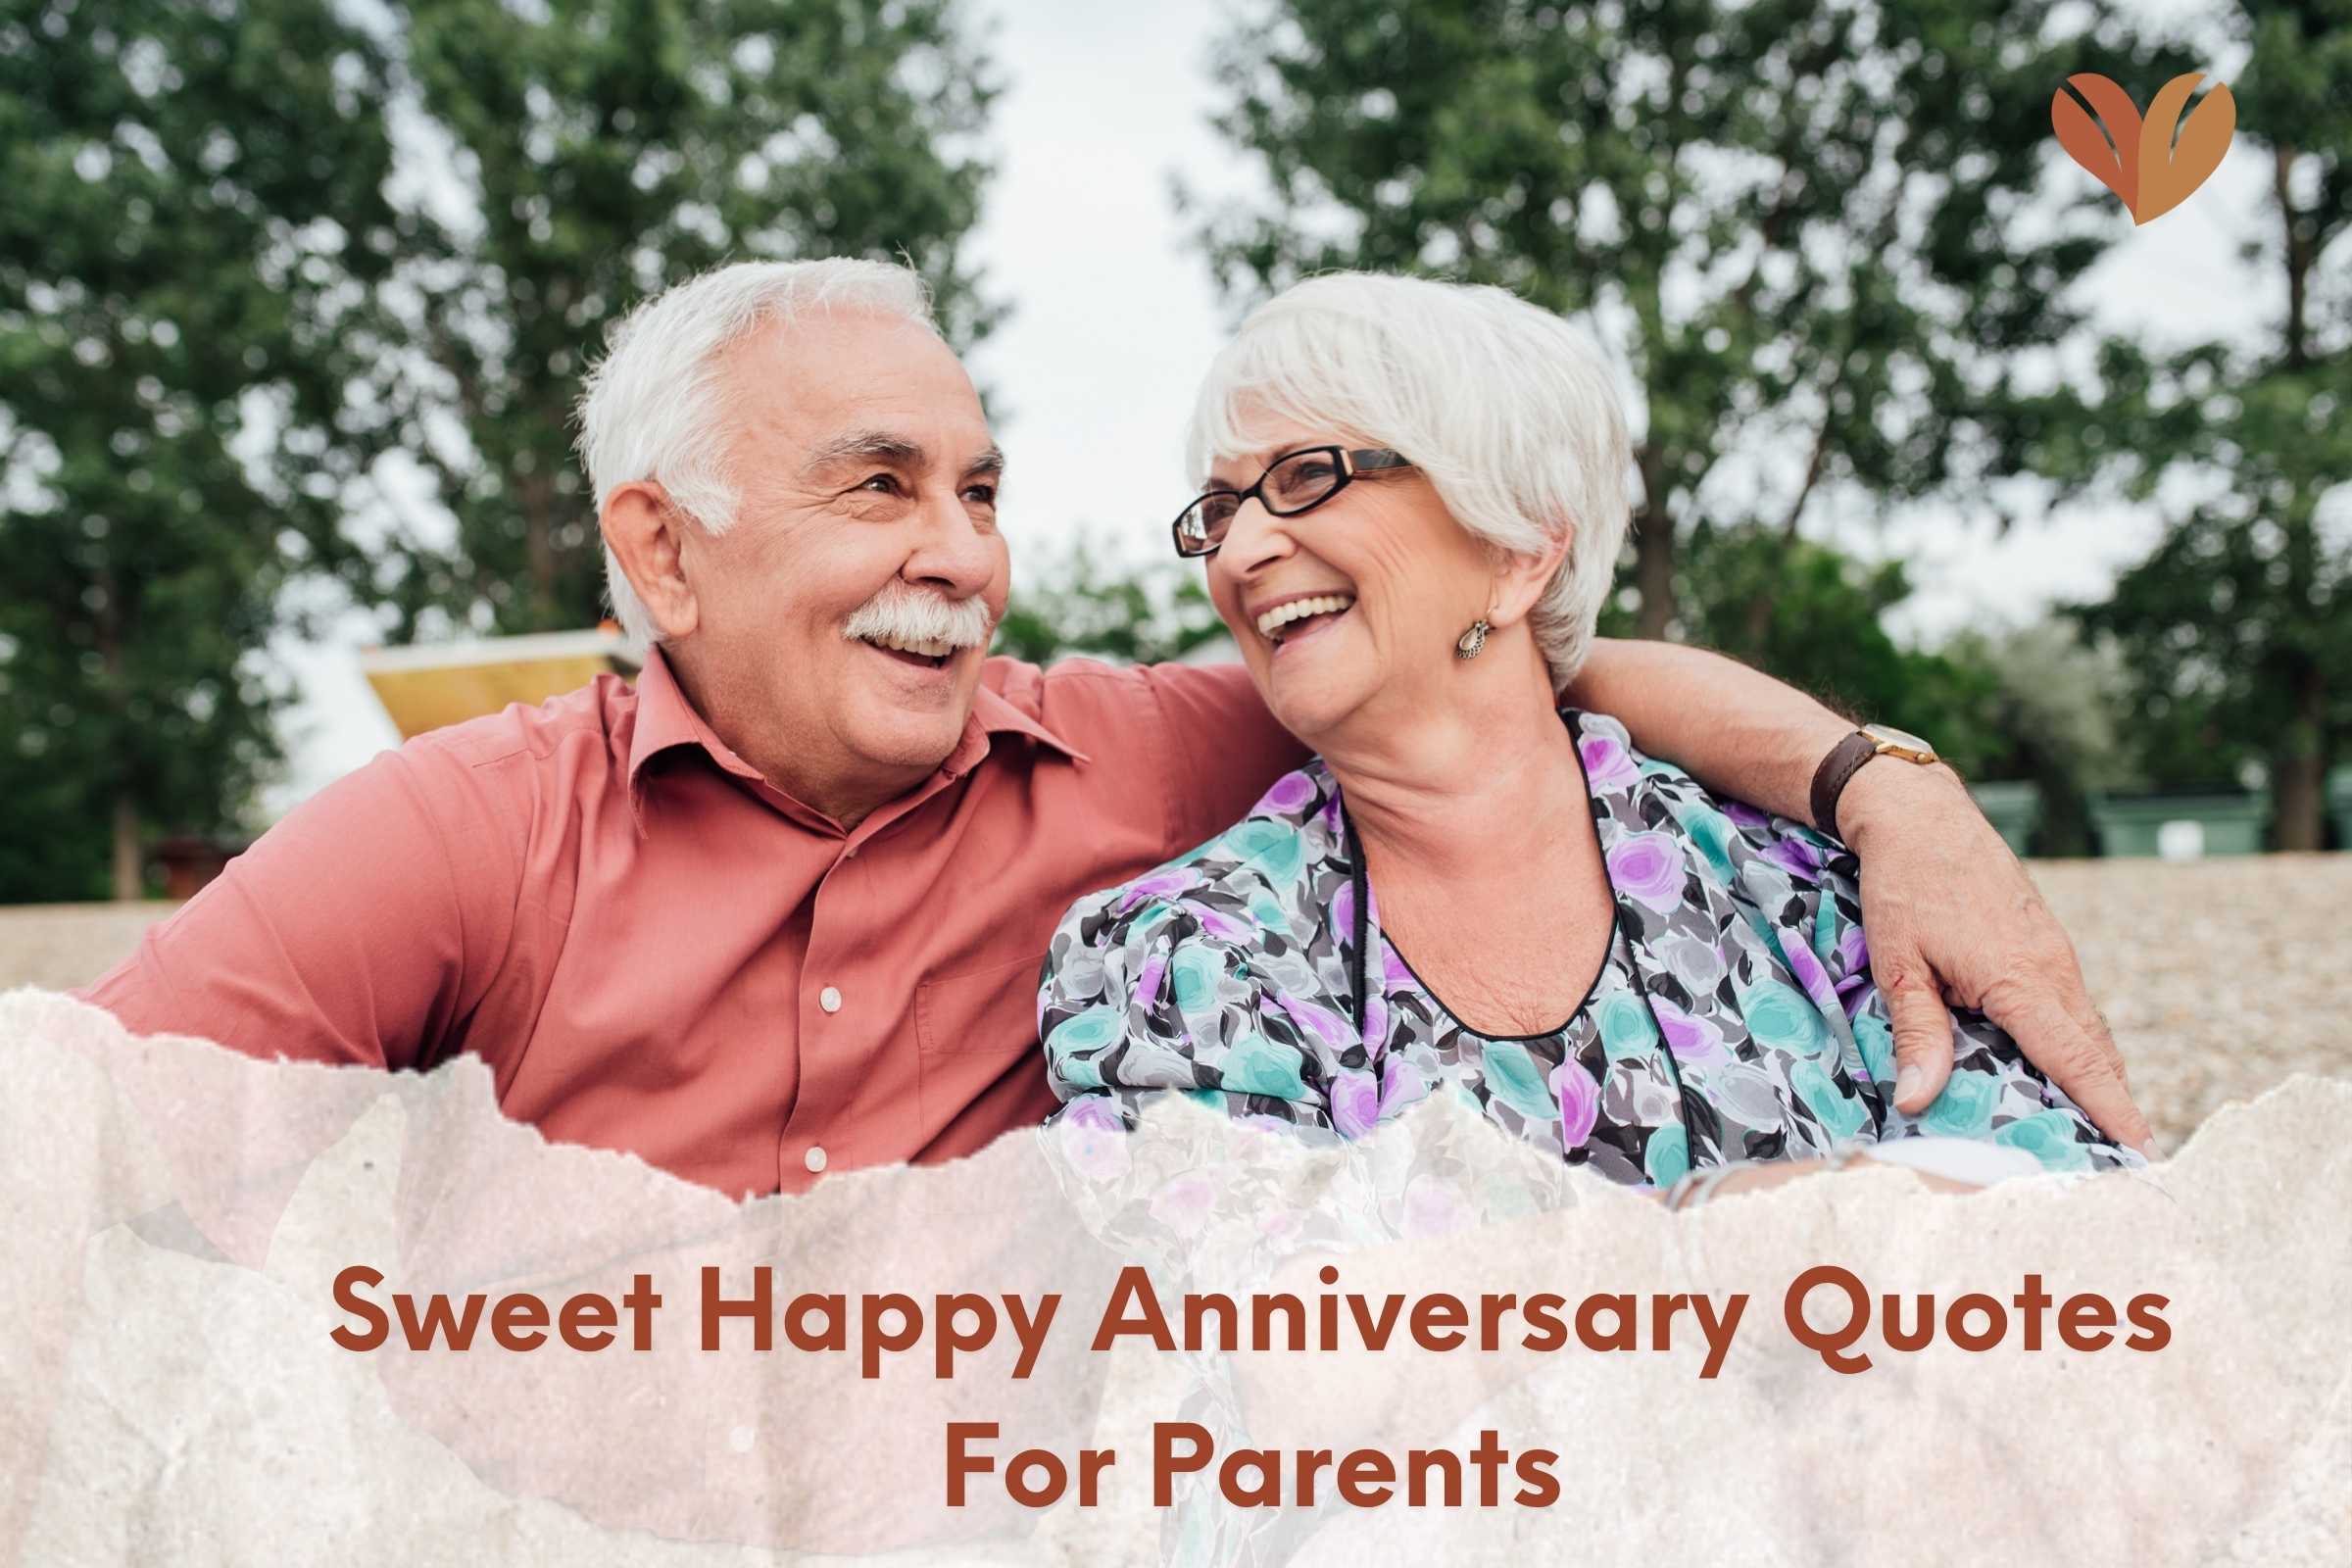 Smiling parents embrace, a perfect backdrop for anniversary quotes for parents.